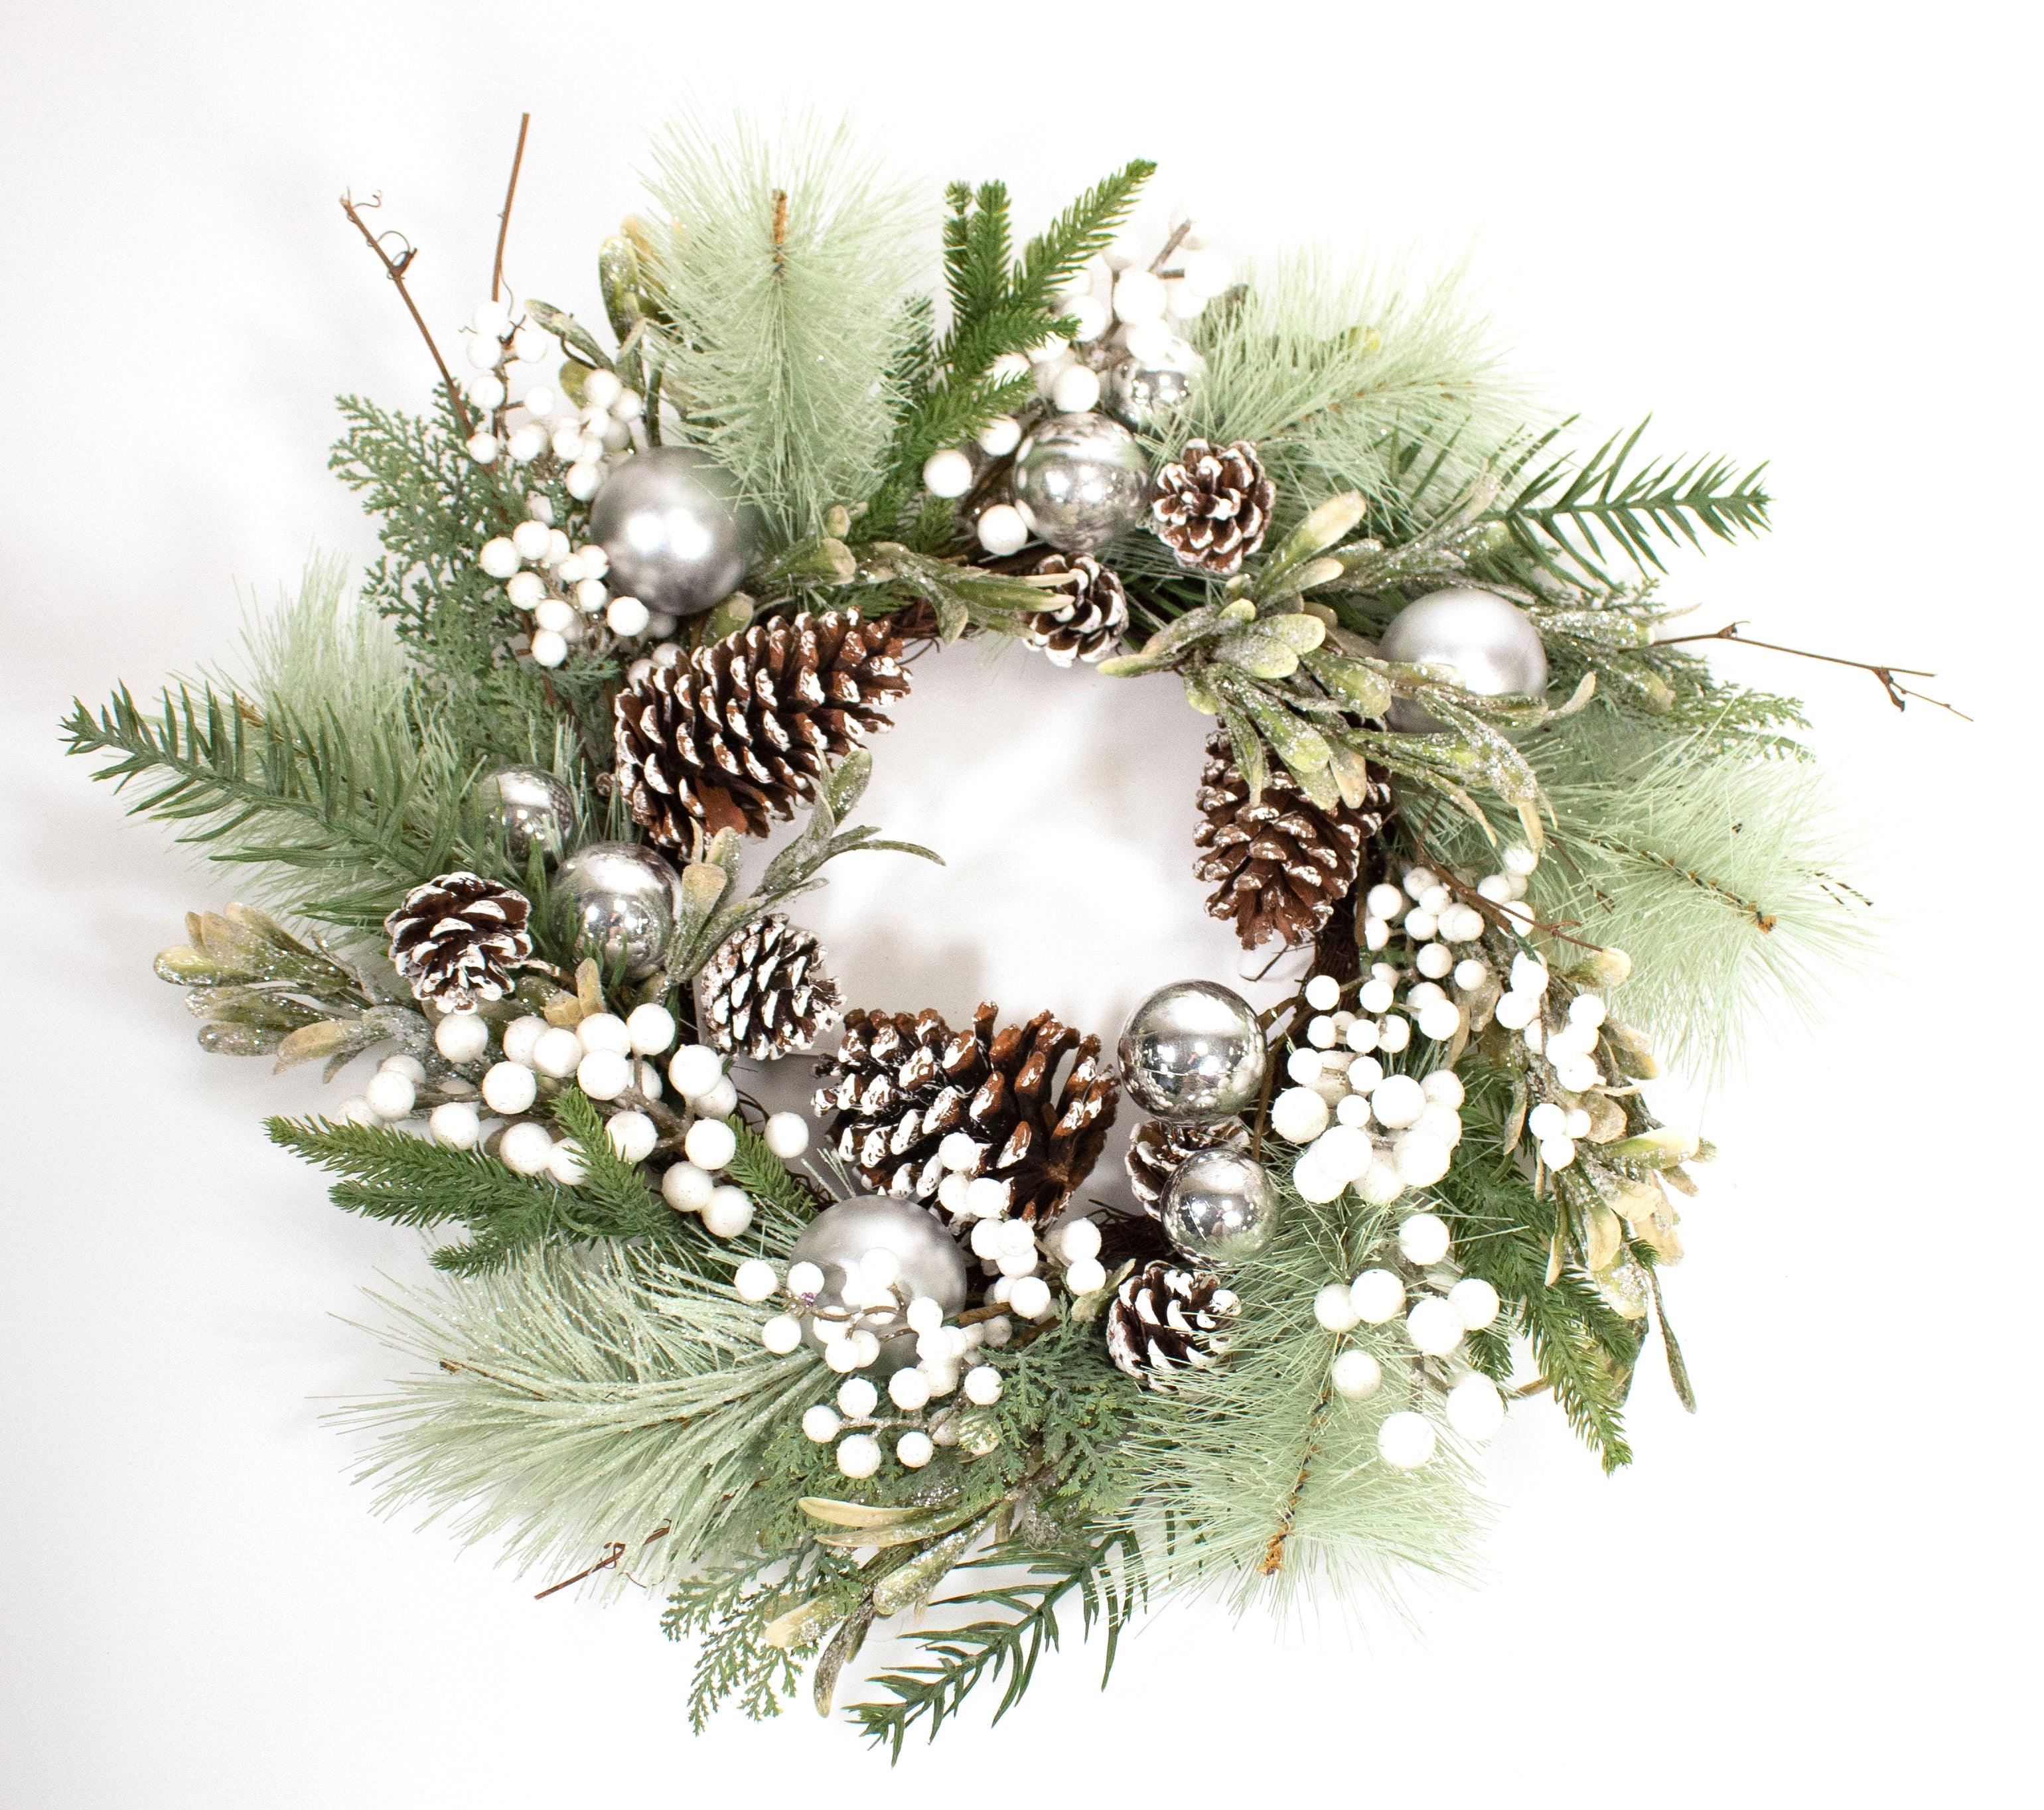 60cm White Berry and Silver Bauble Christmas Wreath - General Hardware Supplies Homevalue